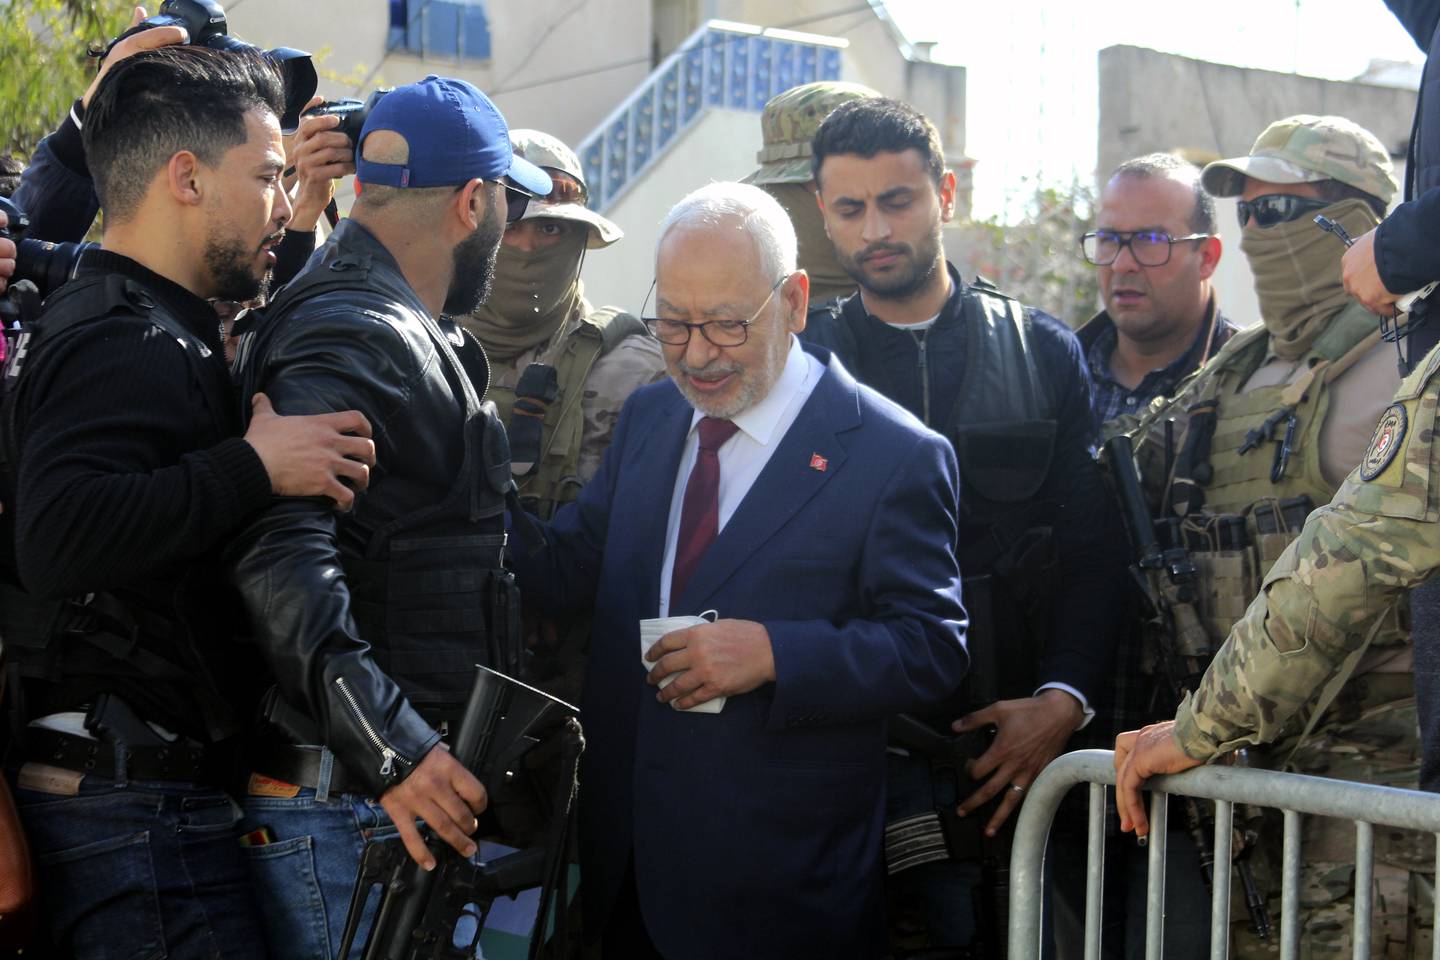 Leader of Tunisia's Islamist Ennahda party House Speaker Rached Ghannouchi, center, arrives for questioning at the judicial police headquarters in Tunis, Tunisia, Friday, April 1, 2022.  (AP Photo / Hassene Dridi)